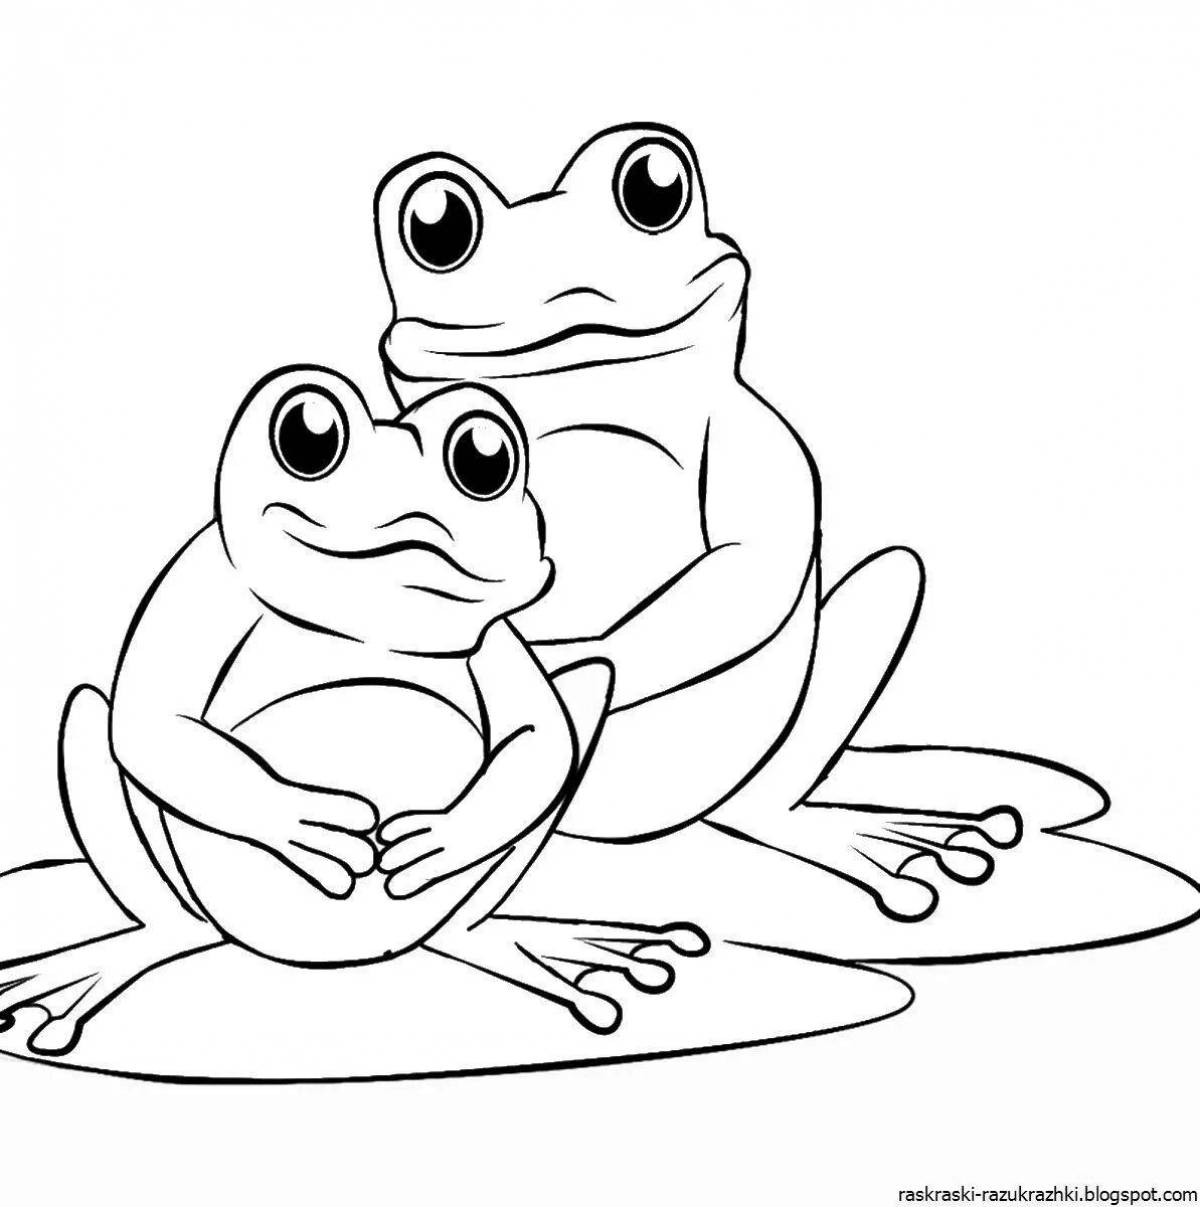 Frog drawing for kids #5